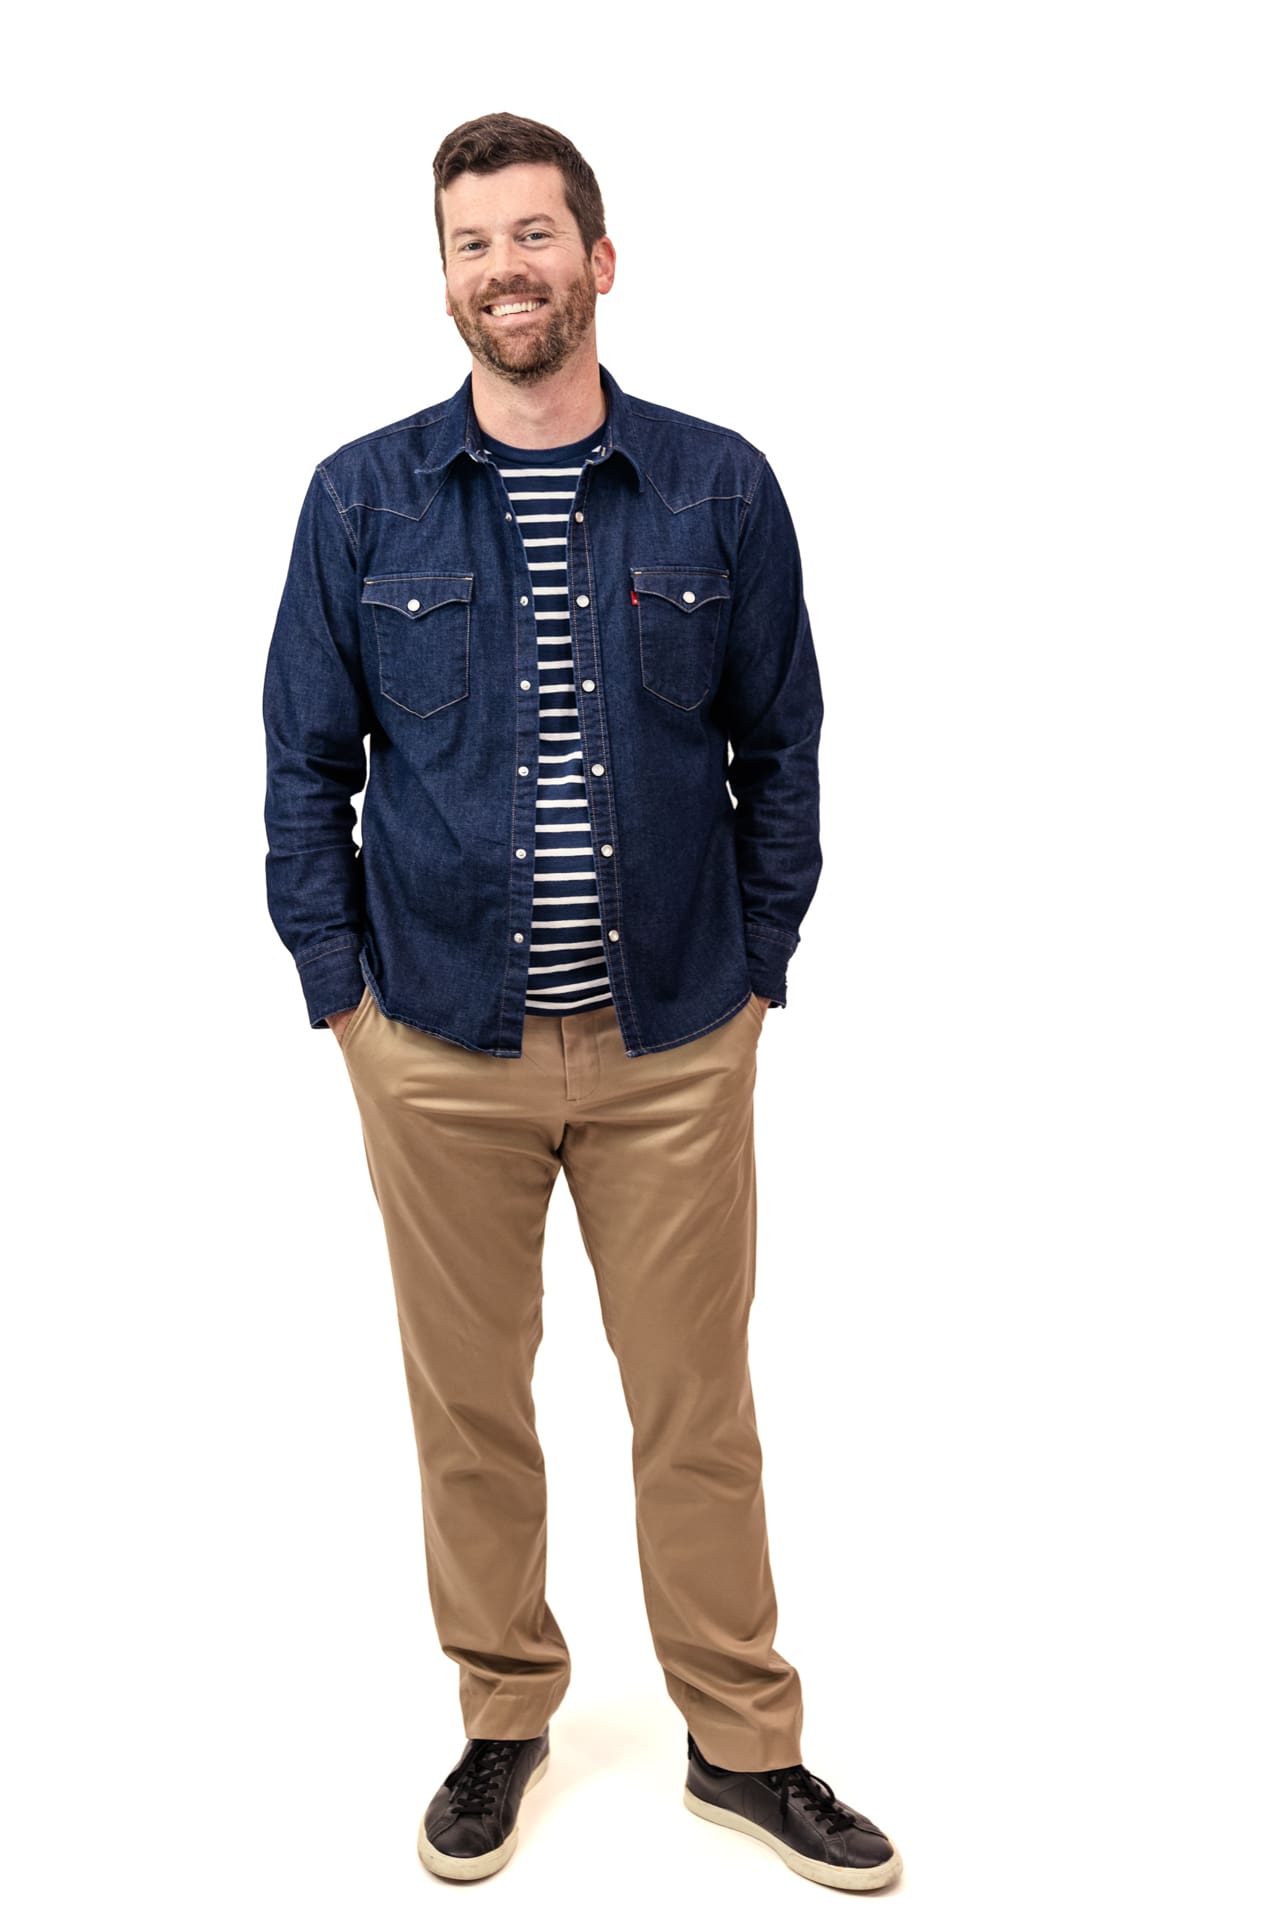 Studio portrait of man wearing denim shirt and khaki pants with sneakers on white backdrop at Chicago photography studio P&M Studio